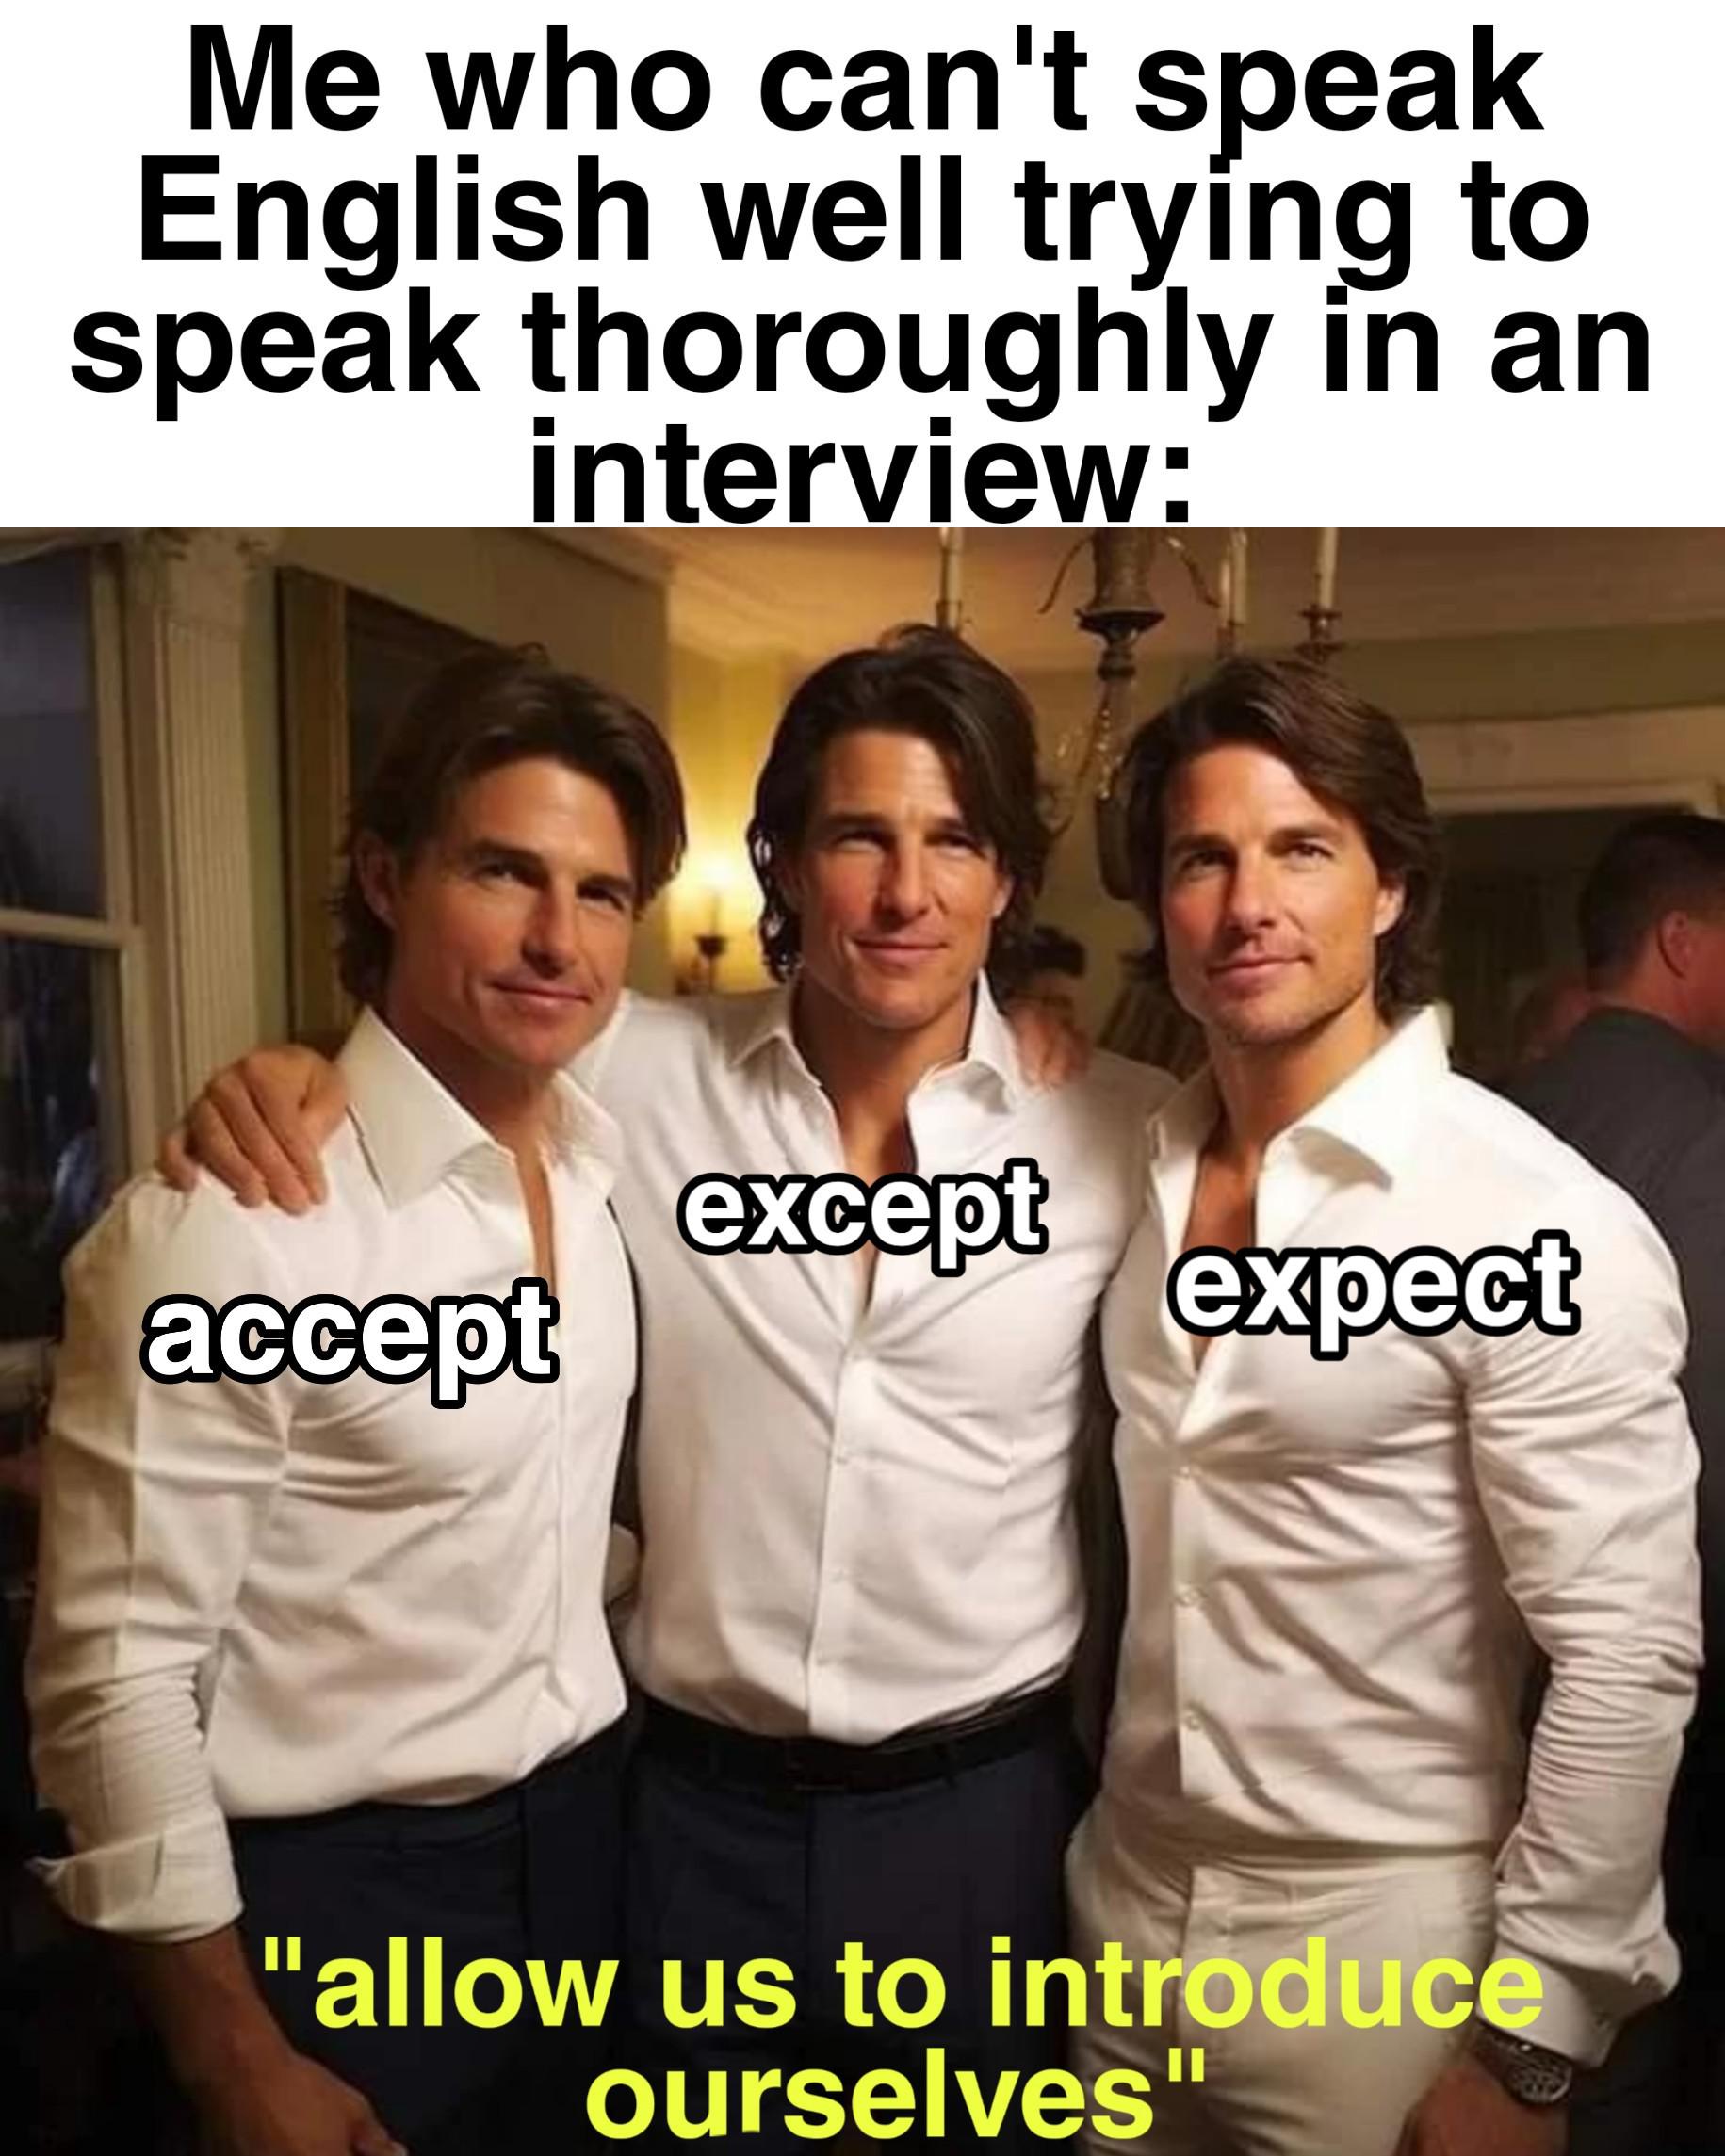 trending memes - shoulder - Me who can't speak English well trying to speak thoroughly in an interview accept except expect "allow us to introduce ourselves"